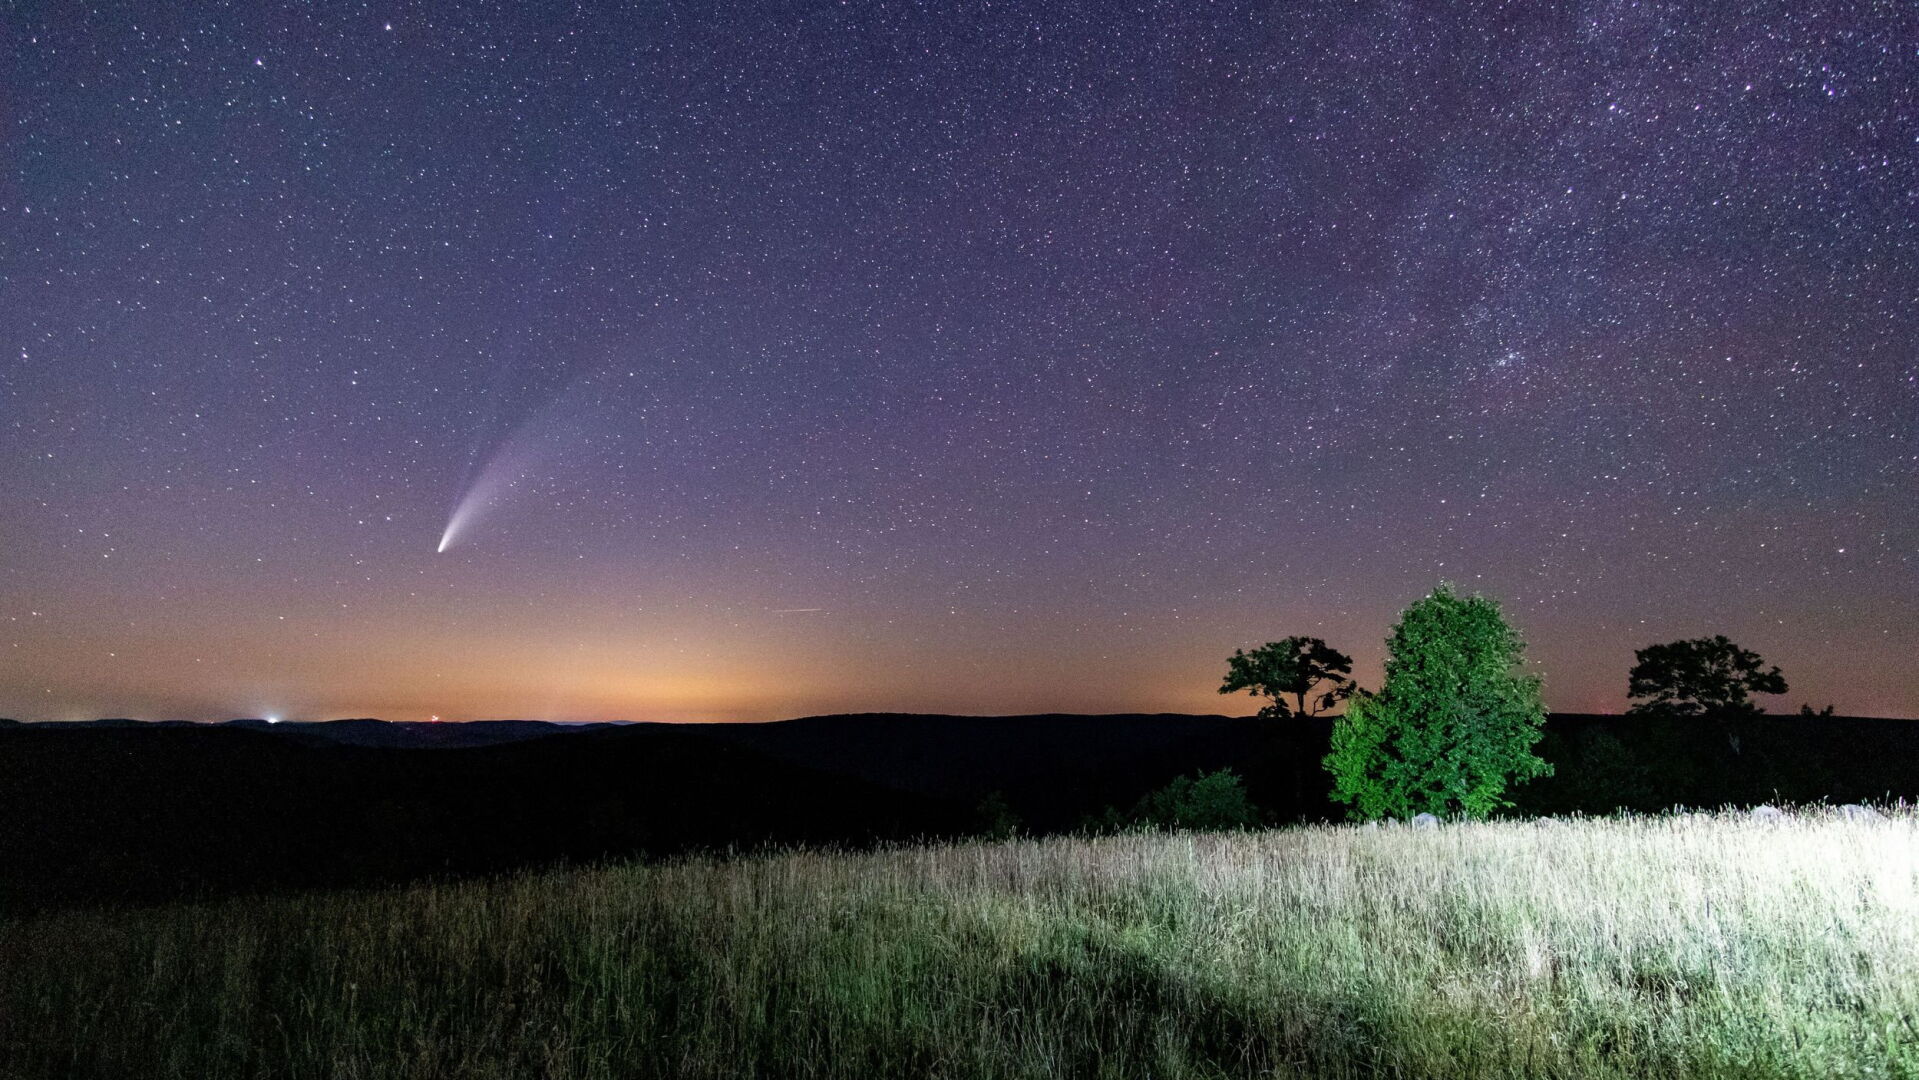 Environmental groups, residents battle light pollution in effort to save night sky in Pa pic